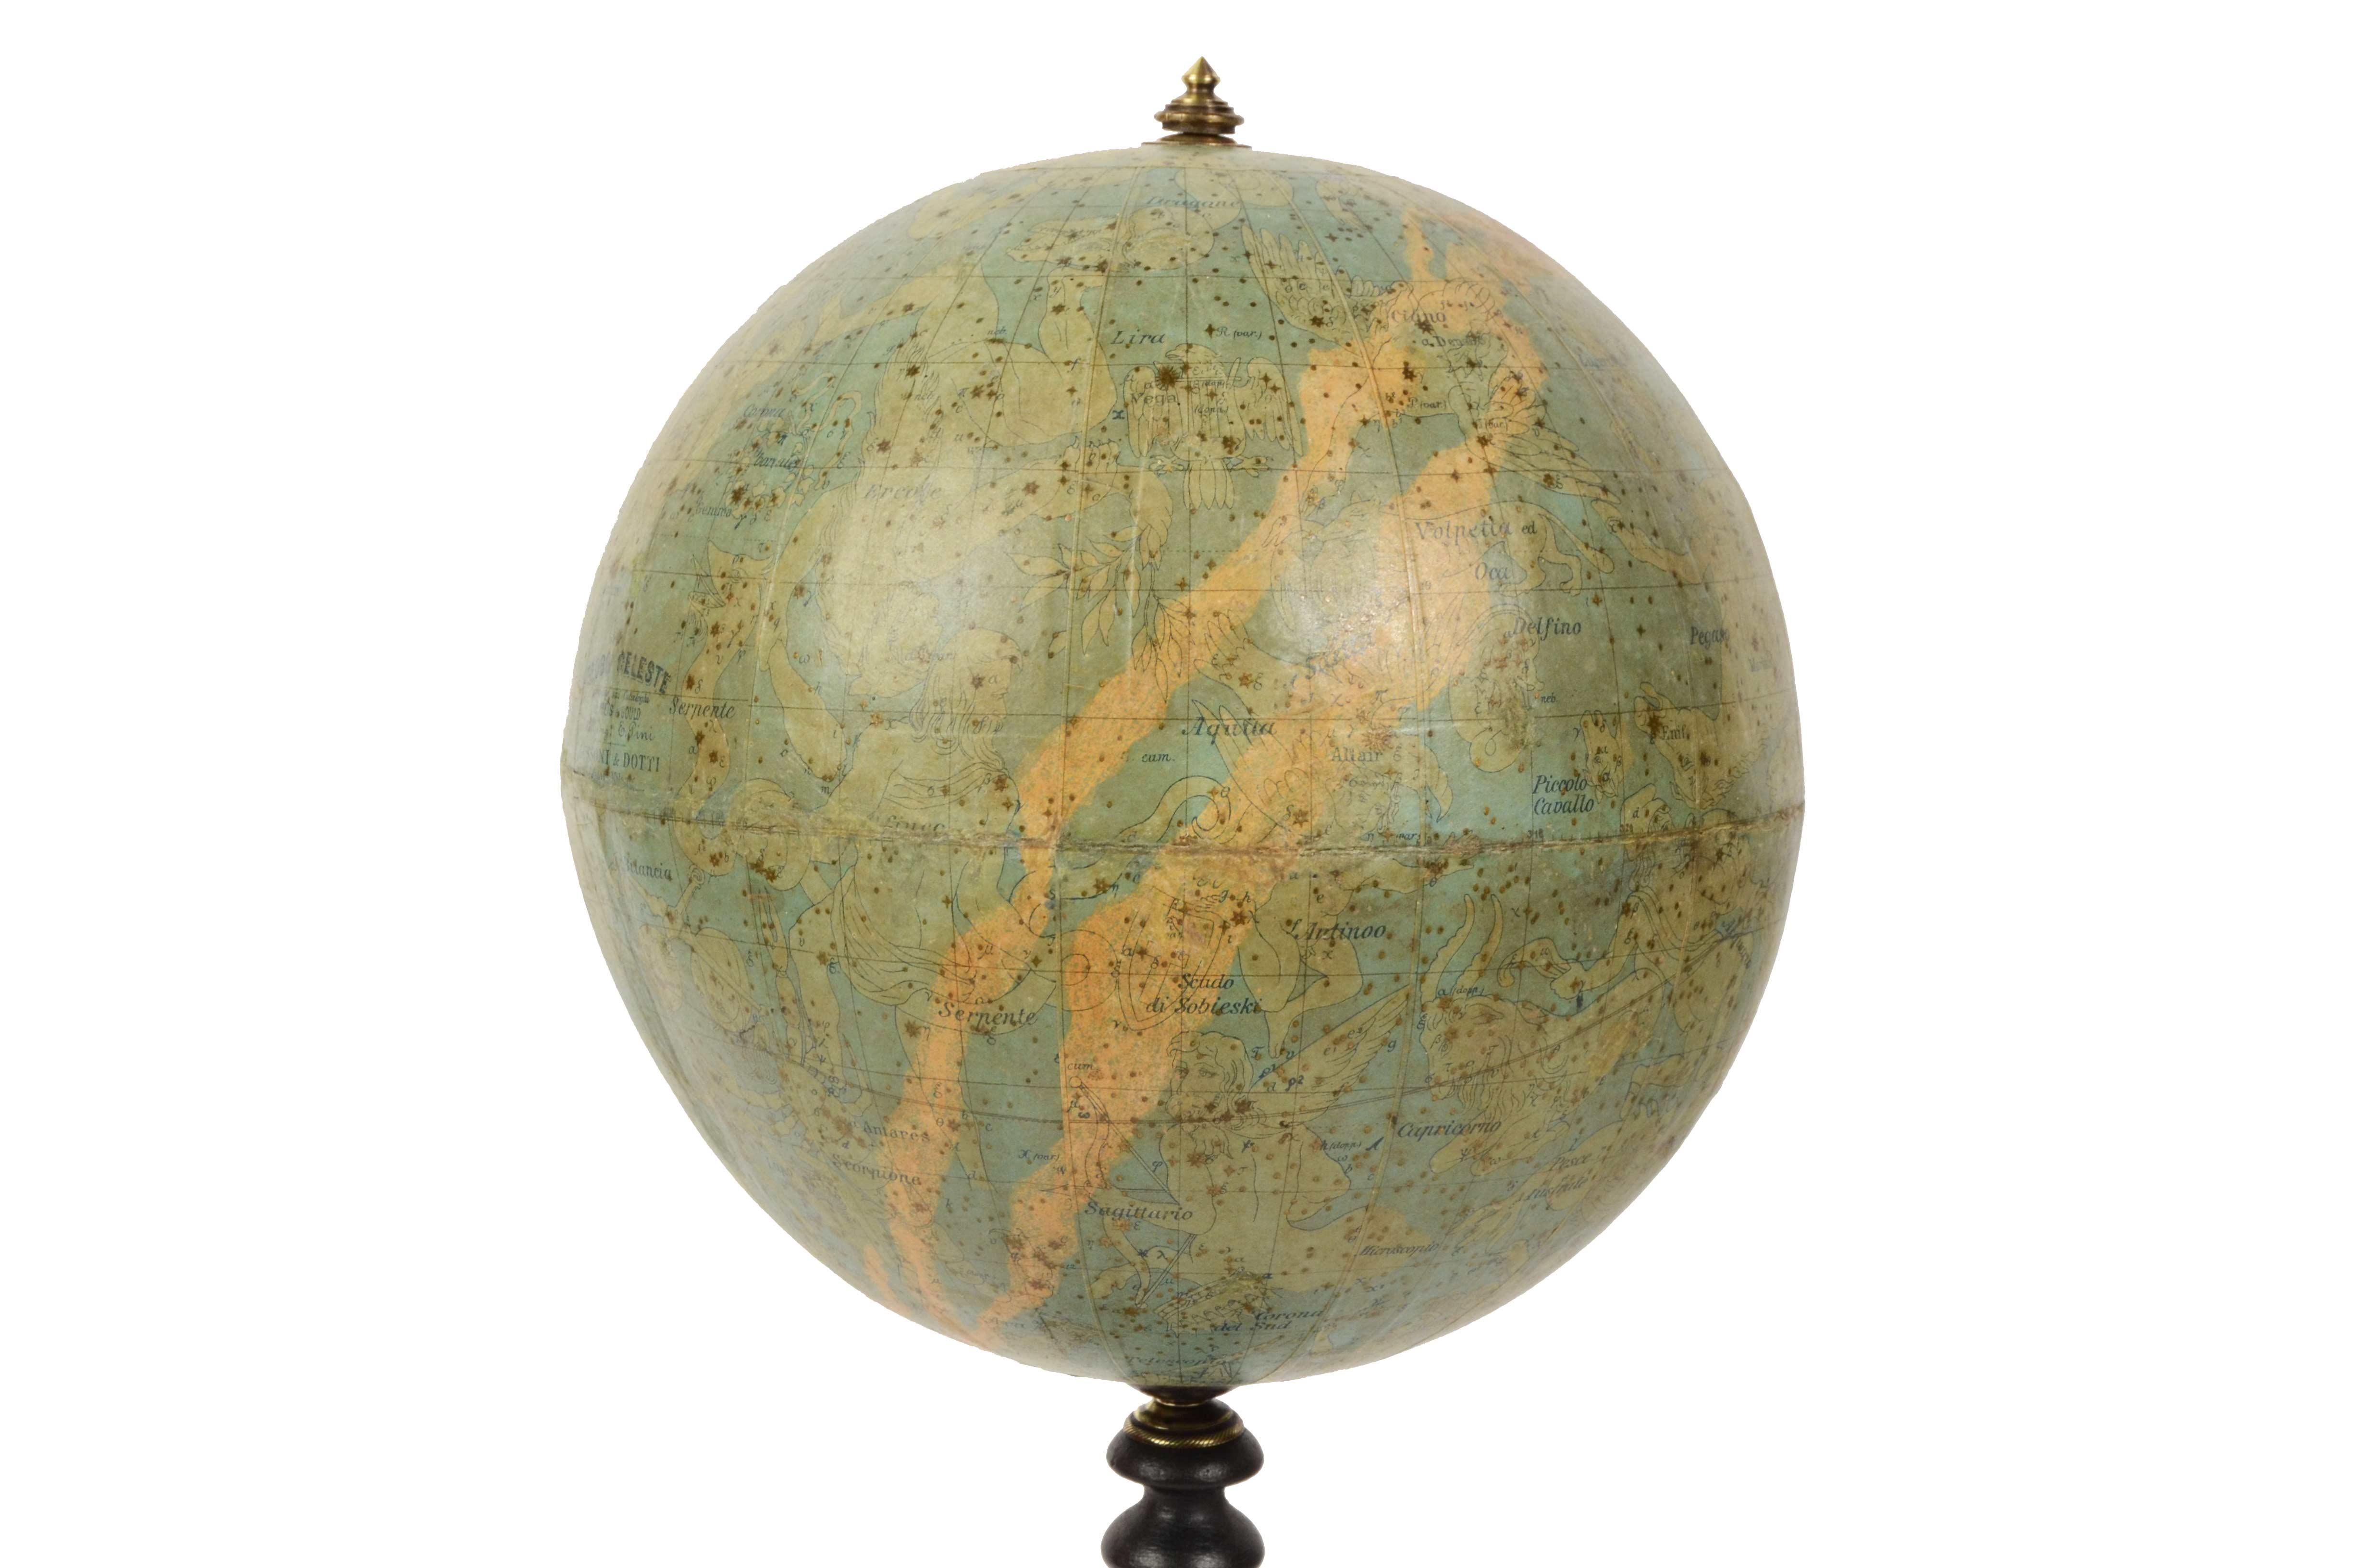 Celestial globe compiled on the Hesi & Gould catalogs by Eng. Pini and published in 1889 by Gussoni & Dotti Milano piazza del Duomo. Sphere in paper mache covered with paper printed by engraving on copper plate and hand watercolored, base in turned